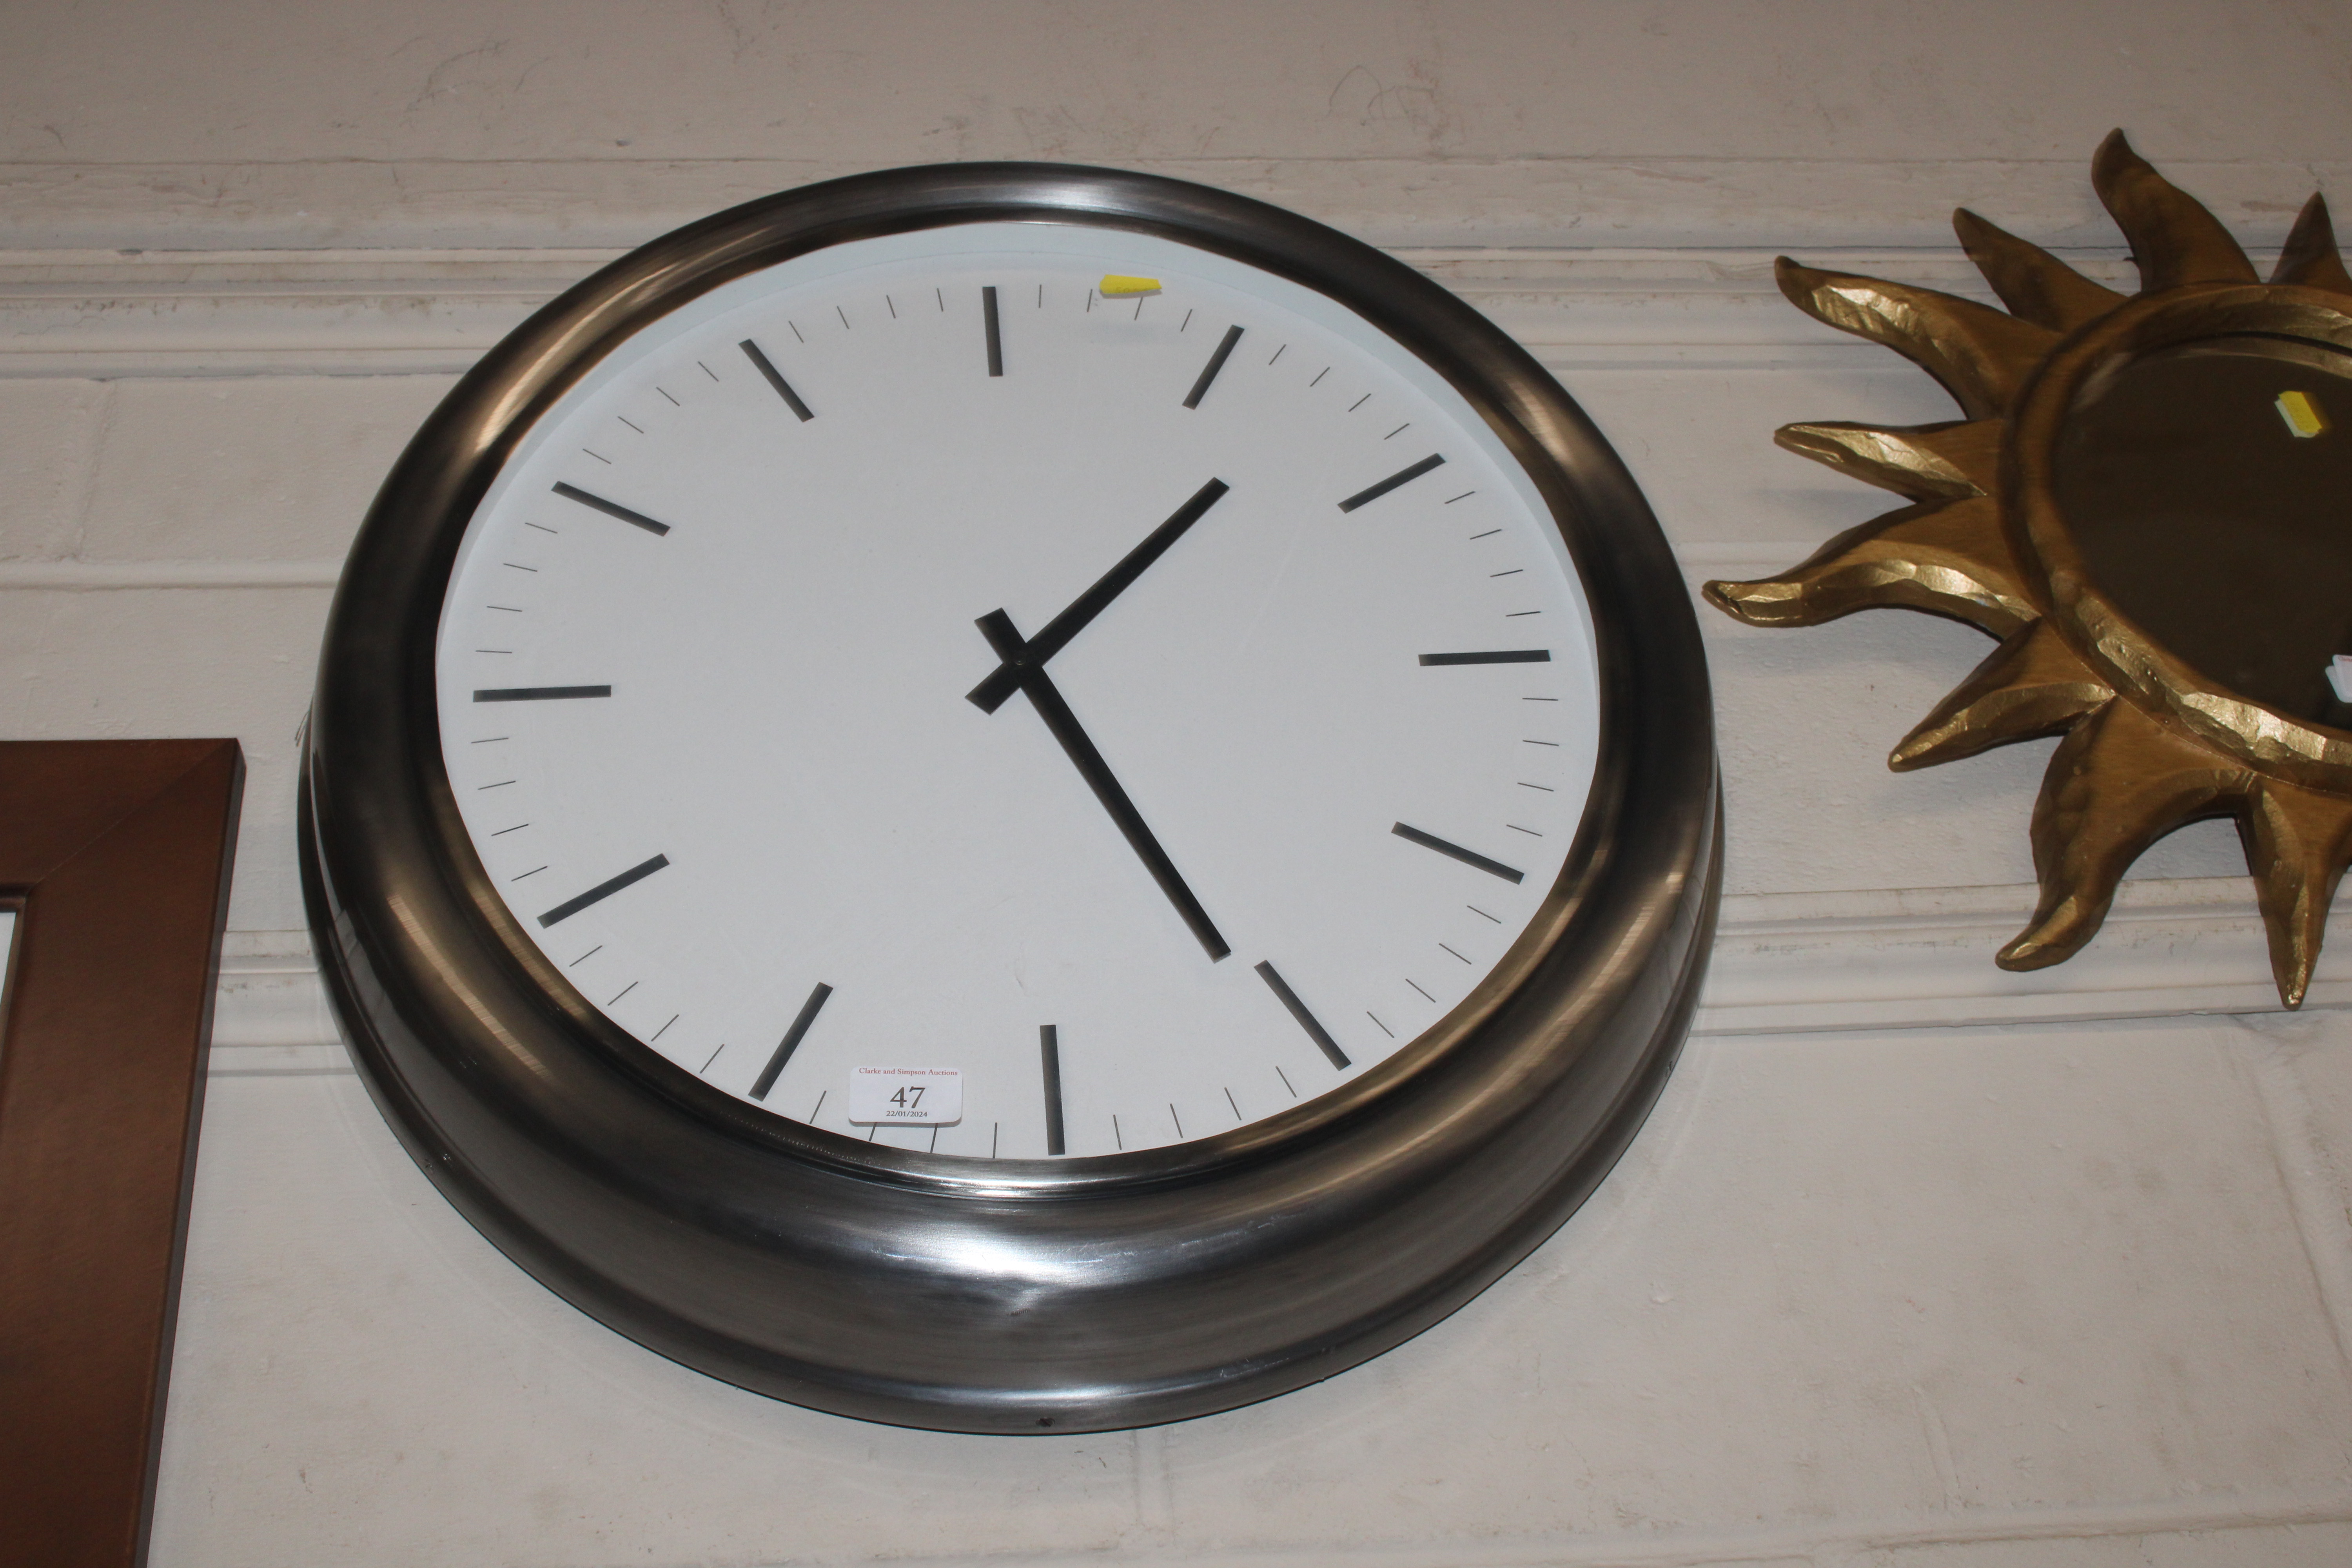 A French Connection wall clock of large proportion